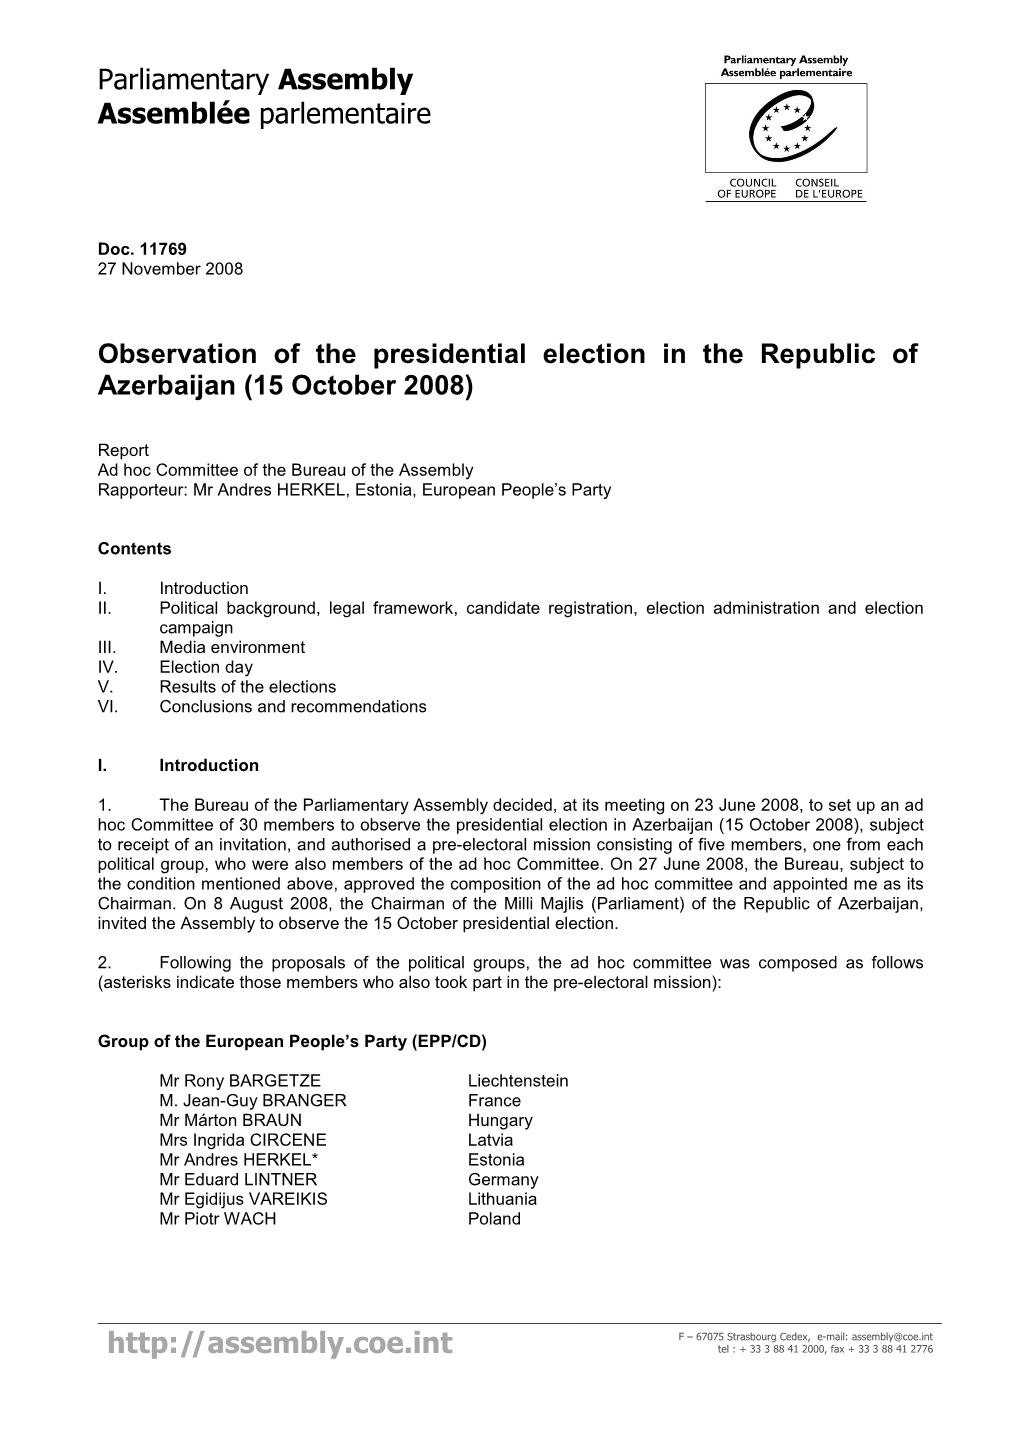 Observation of the Presidential Election in the Republic of Azerbaijan (15 October 2008)